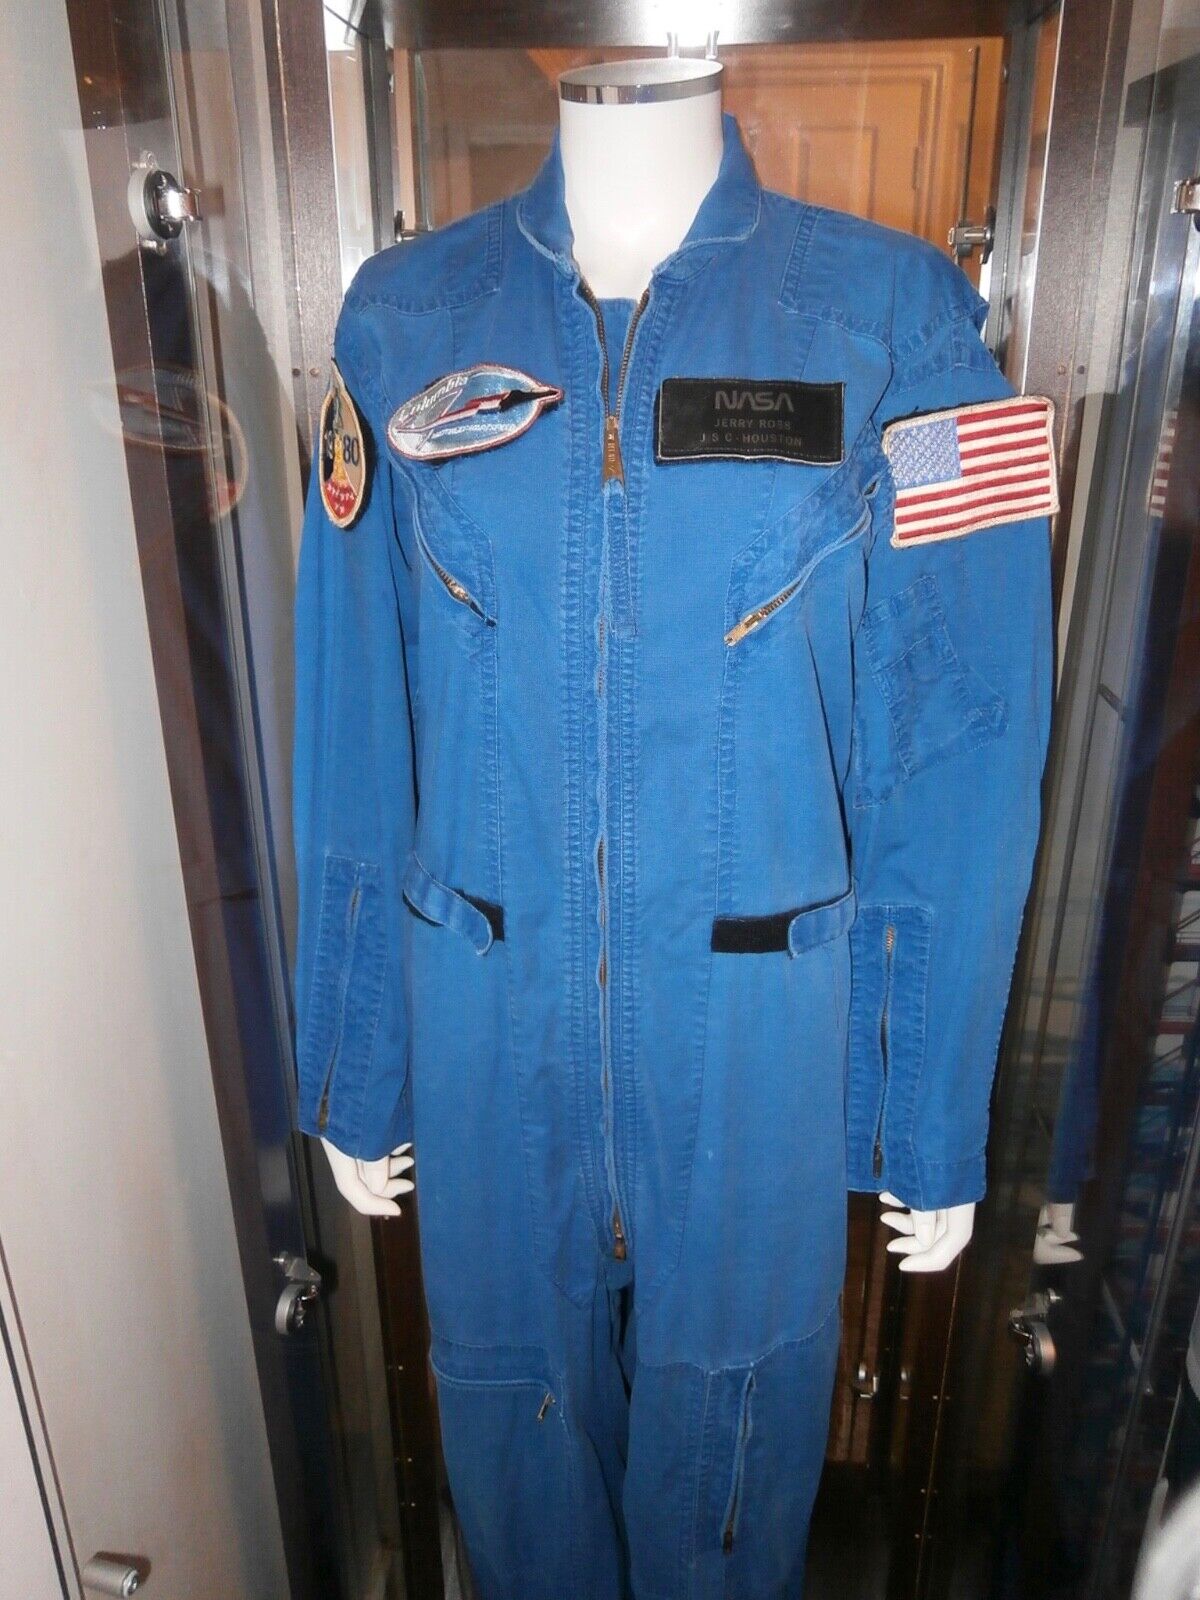 Astronaut flying suit Columbia space shuttle STS 4 worn by Jerry Ross Full COA